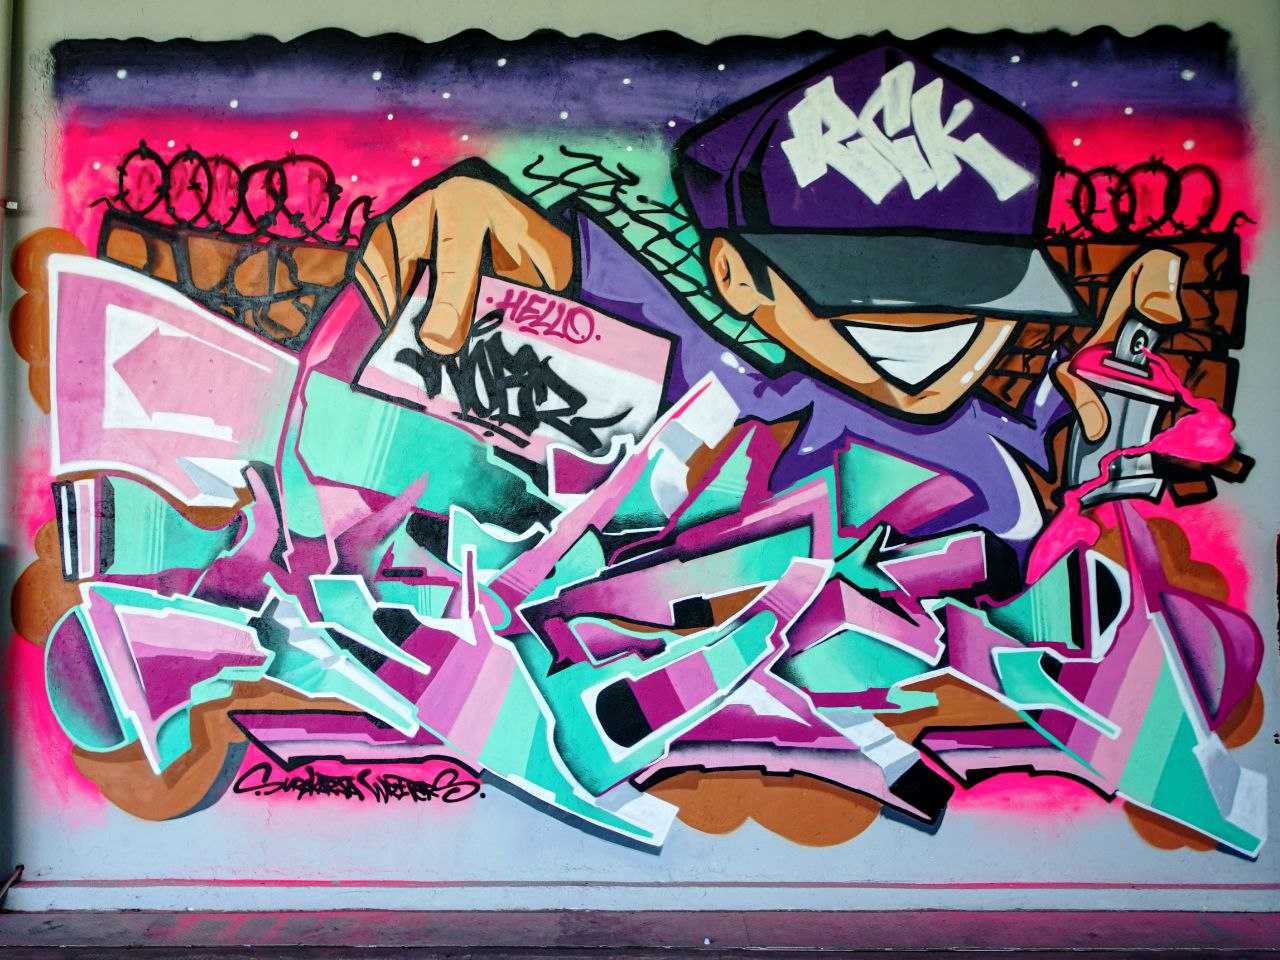 Graffiti by Nobzero at the meeting of styles in Indonesia